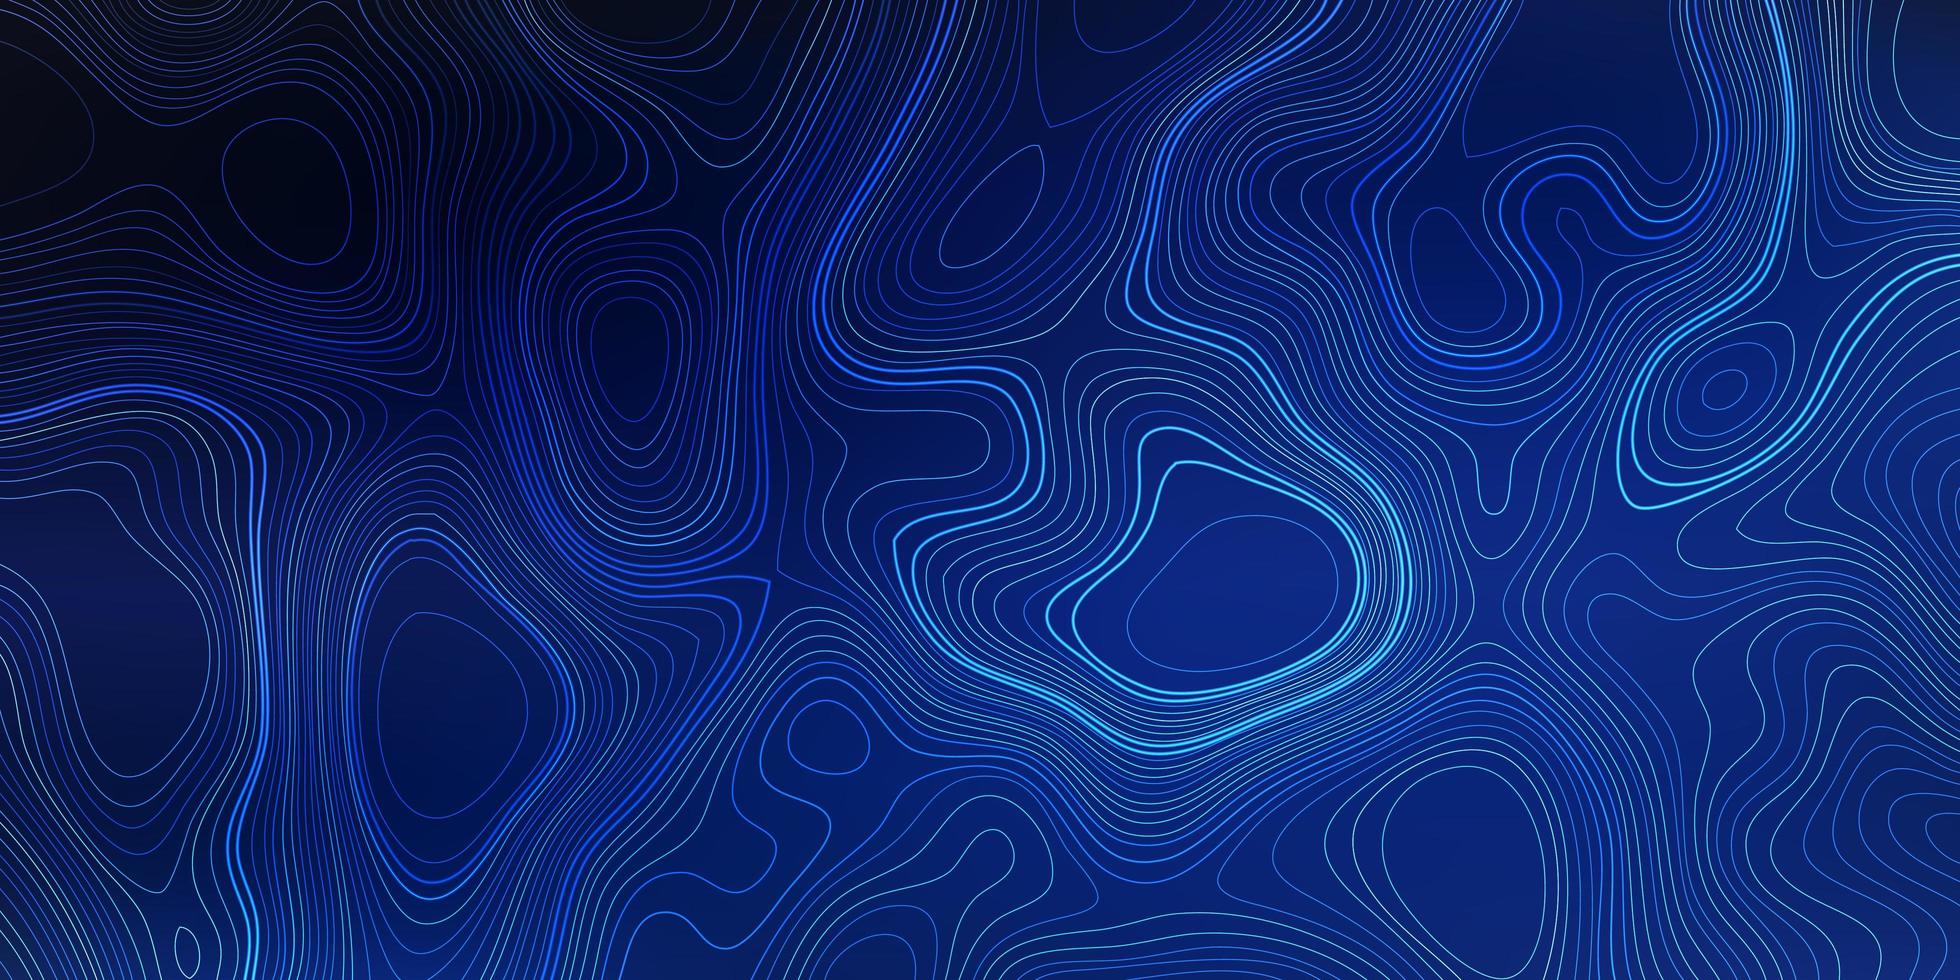 Banner Background with an Abstract Topography Design vector